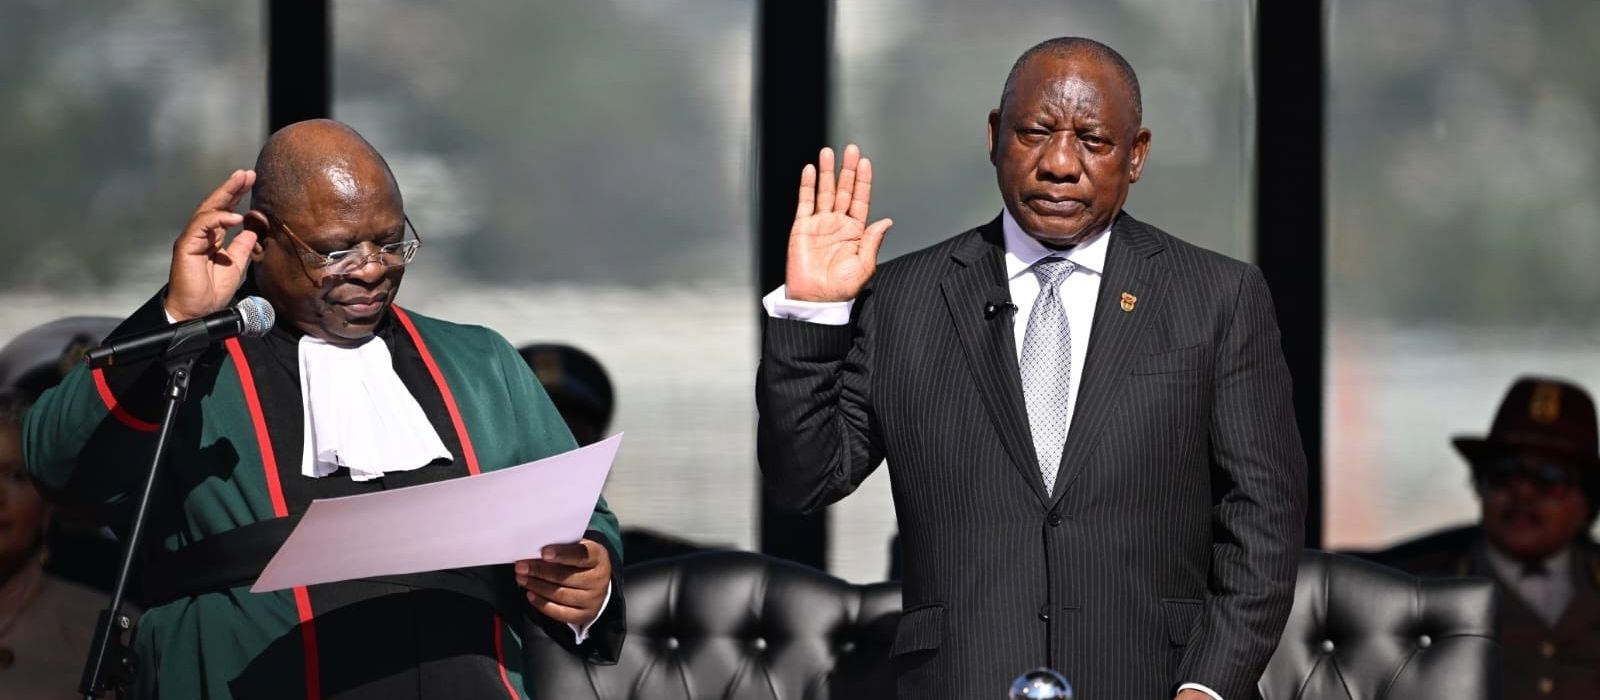 President Ramaphosa commits to upholding South Africa’s constitution in second term